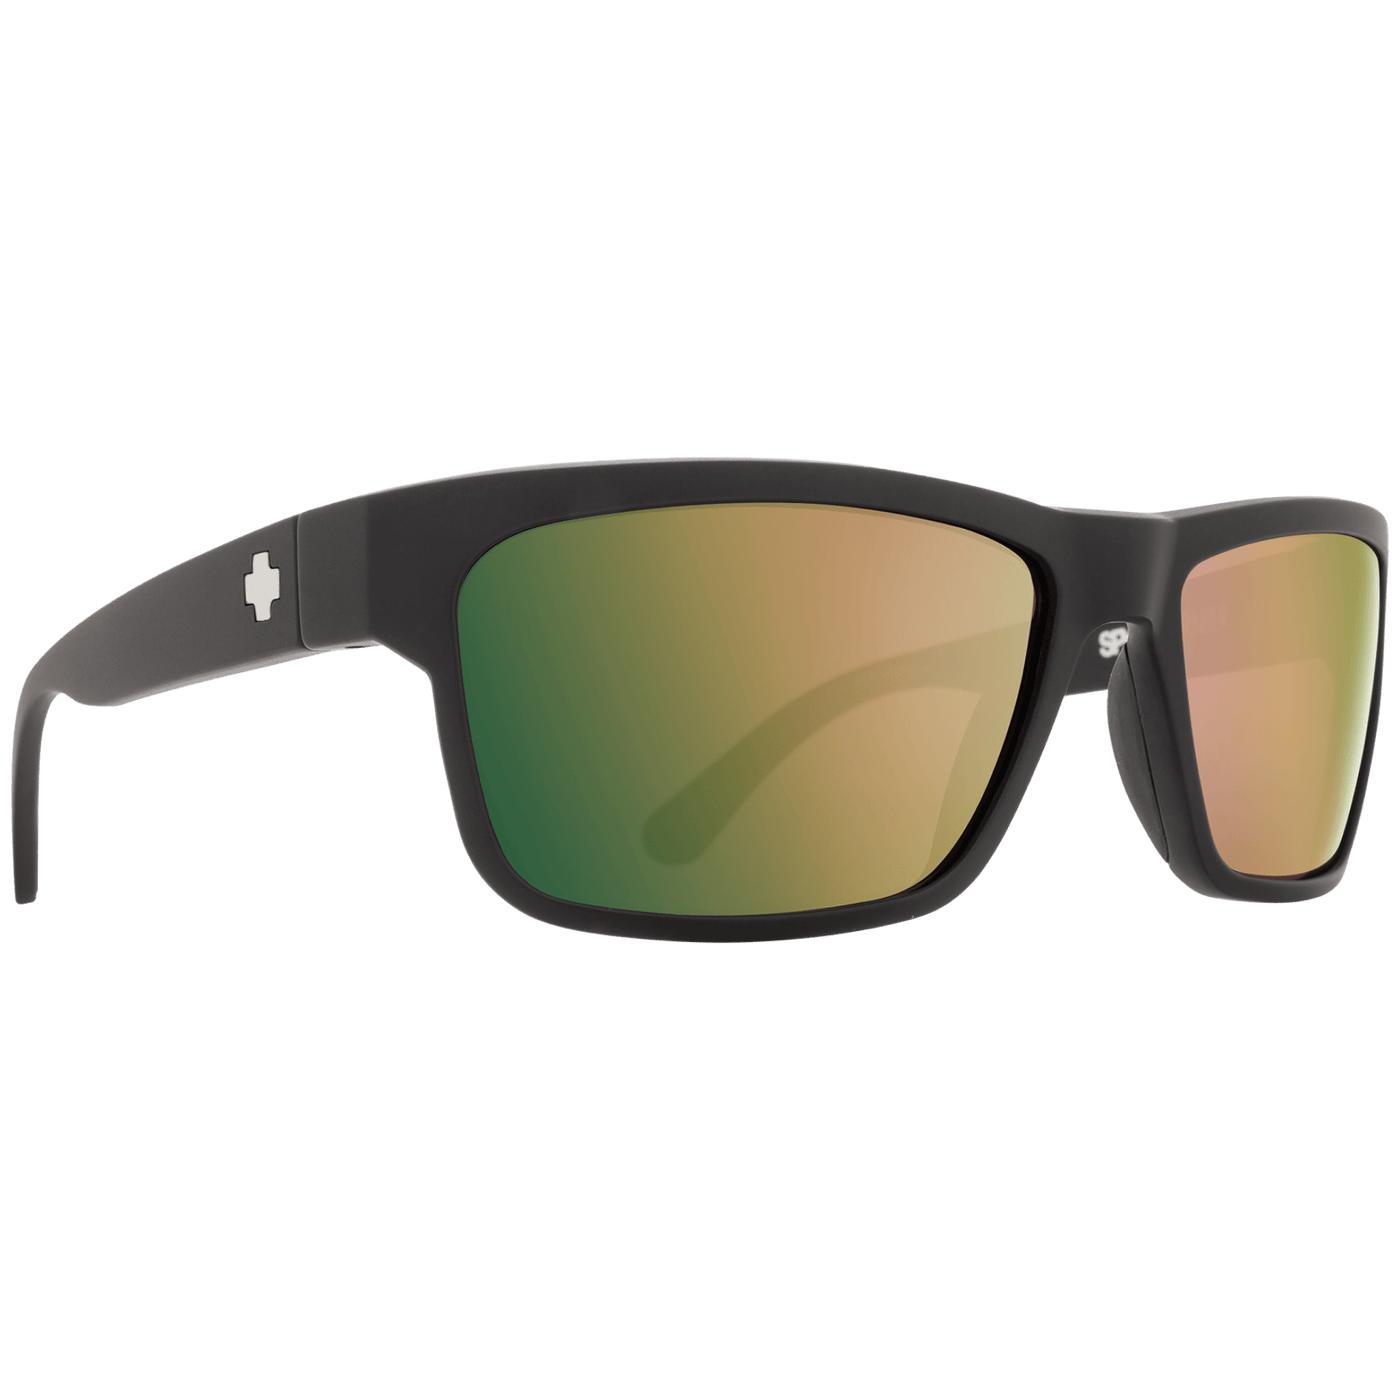 SPY FRAZIER Polarized Sunglasses - Gold 8Lines Shop - Fast Shipping